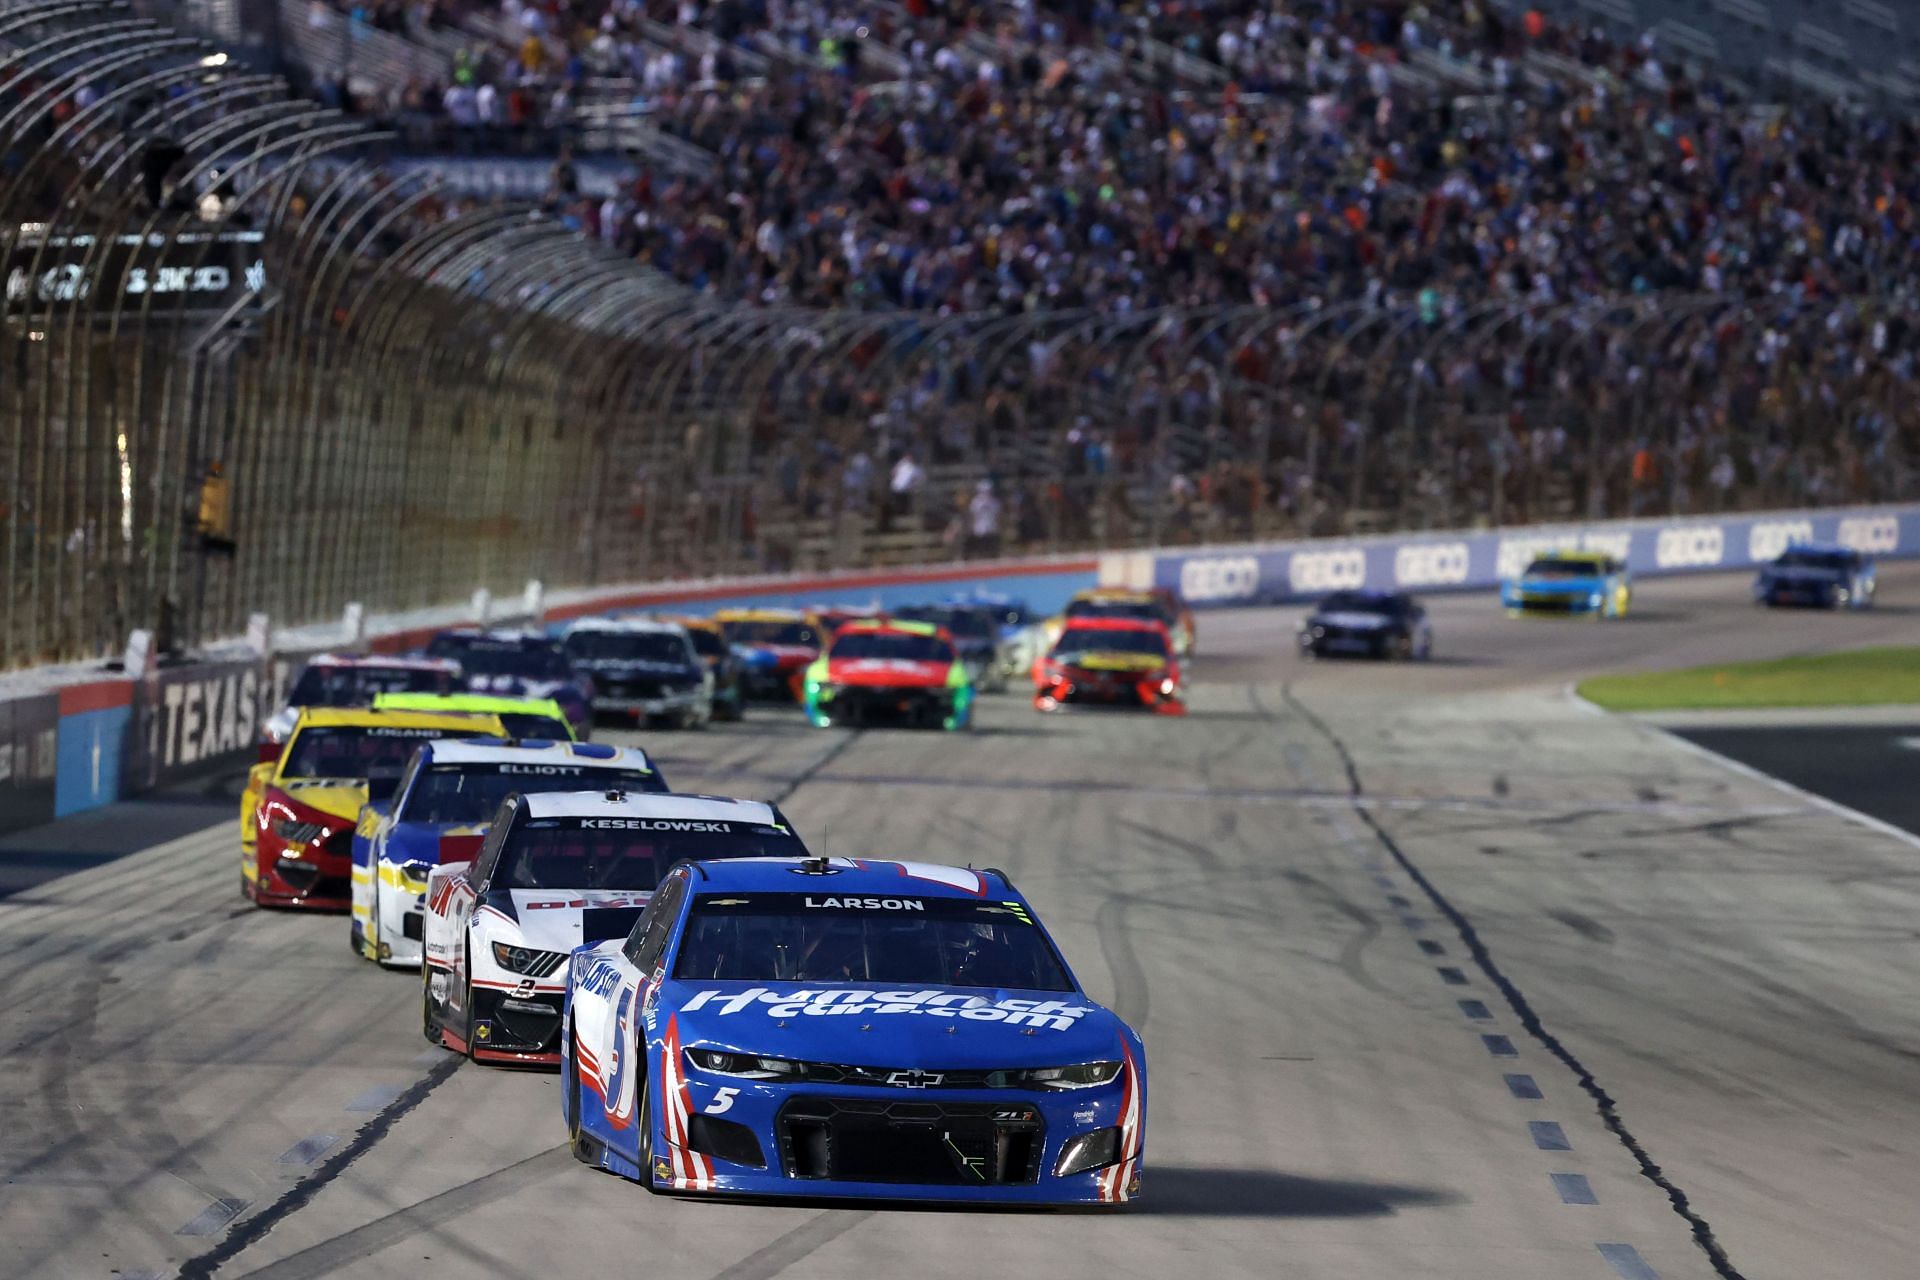 Kyle Larson leads the field during the 2021 NASCAR All-Star Race at Texas Motor Speedway in Fort Worth, Texas (Photo by Carmen Mandato/Getty Images)